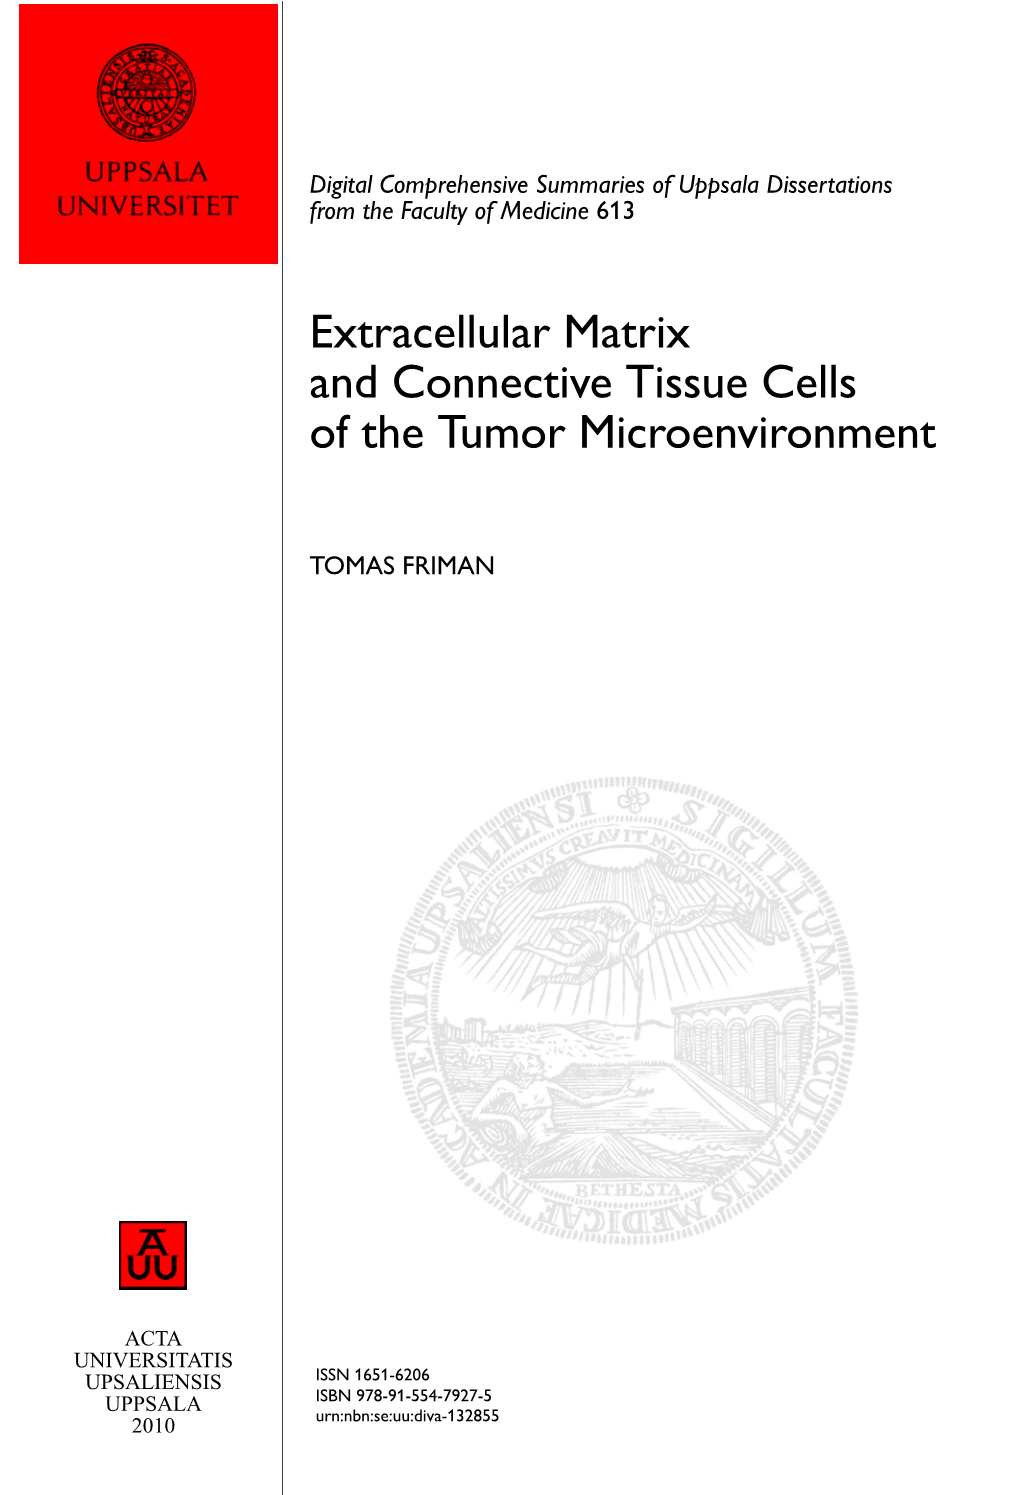 Extracellular Matrix and Connective Tissue Cells of the Tumor Microenvironment